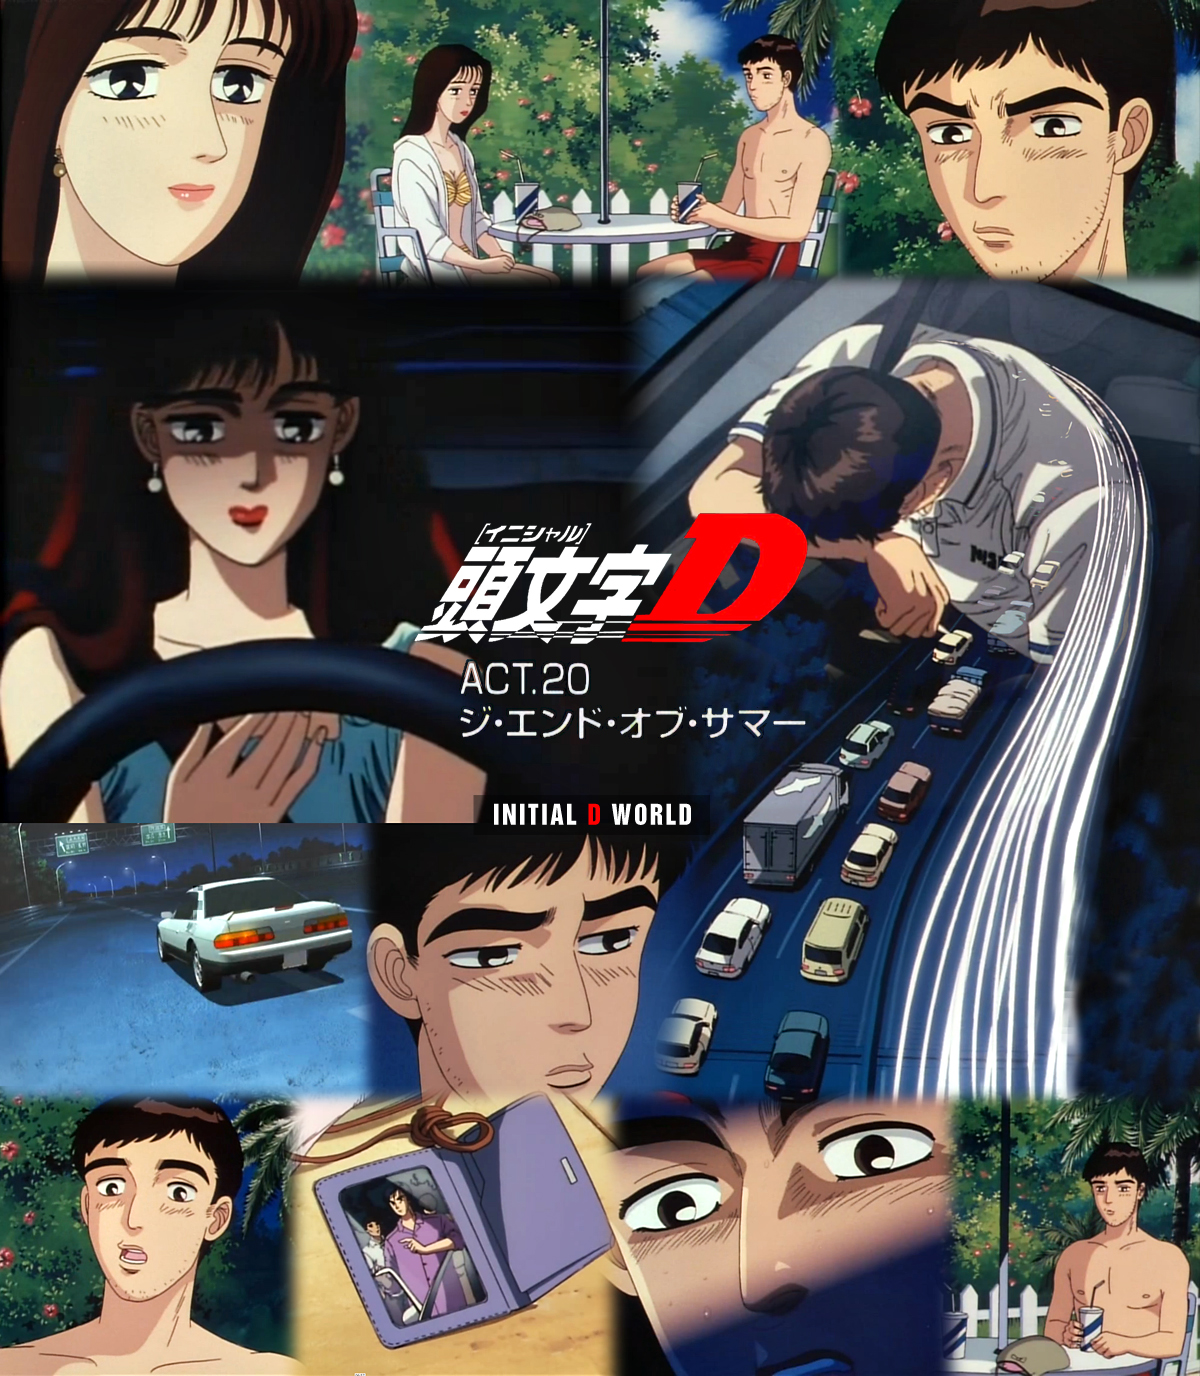 Initial D World - Discussion Board / Forums -> Iketani's Inferiority Complex